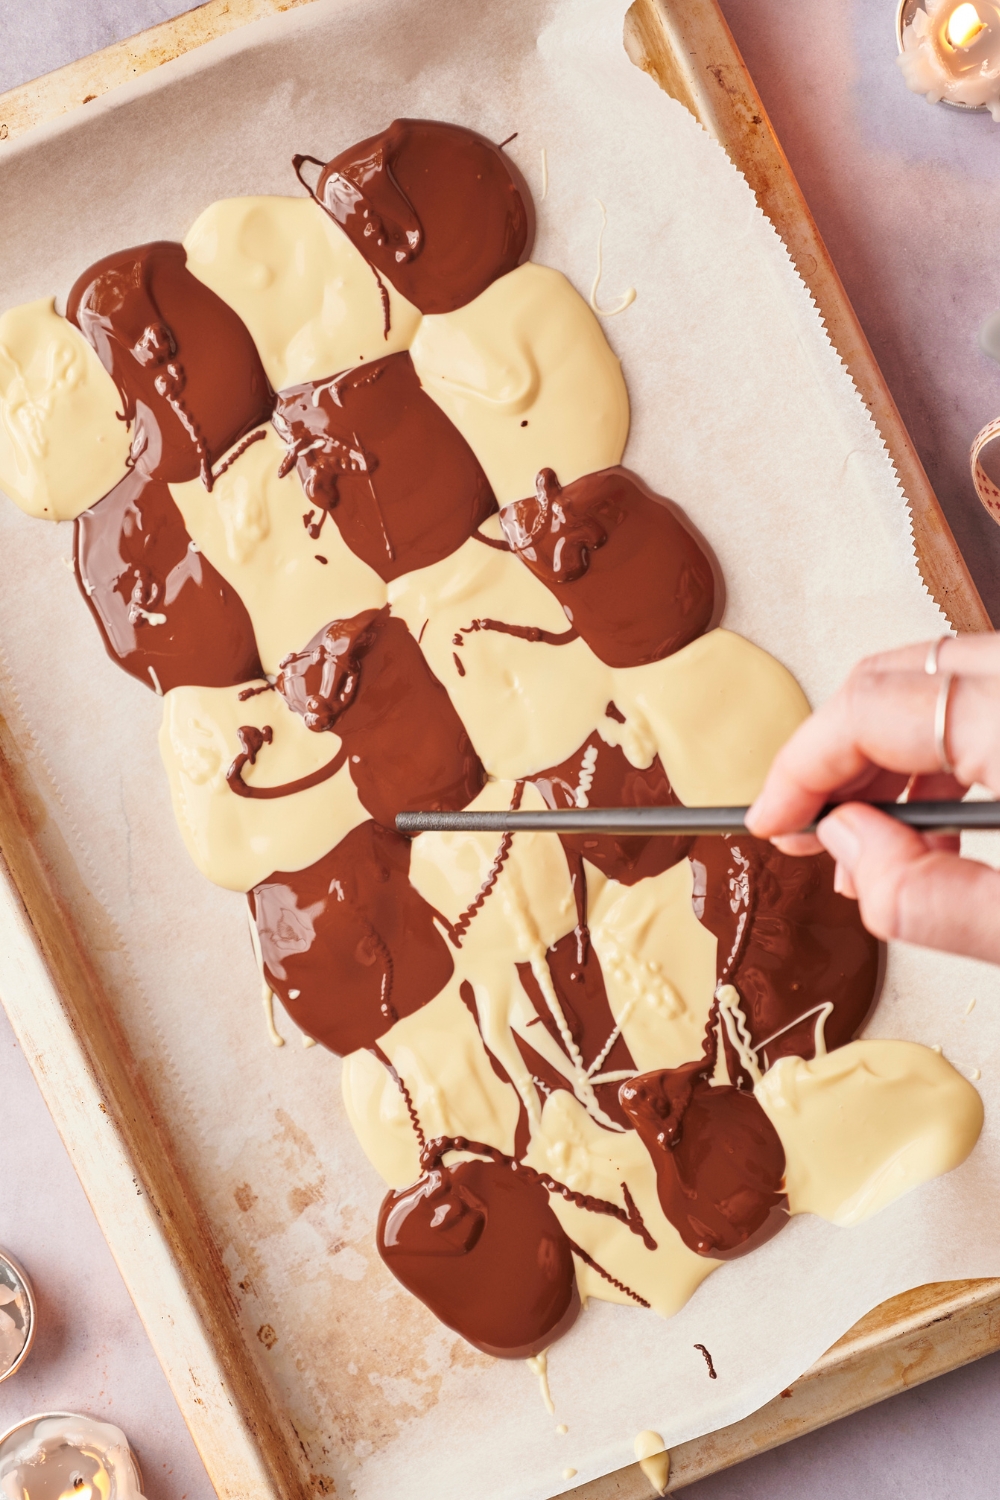 Melted chocolate in a checkered pattern on parchment paper.